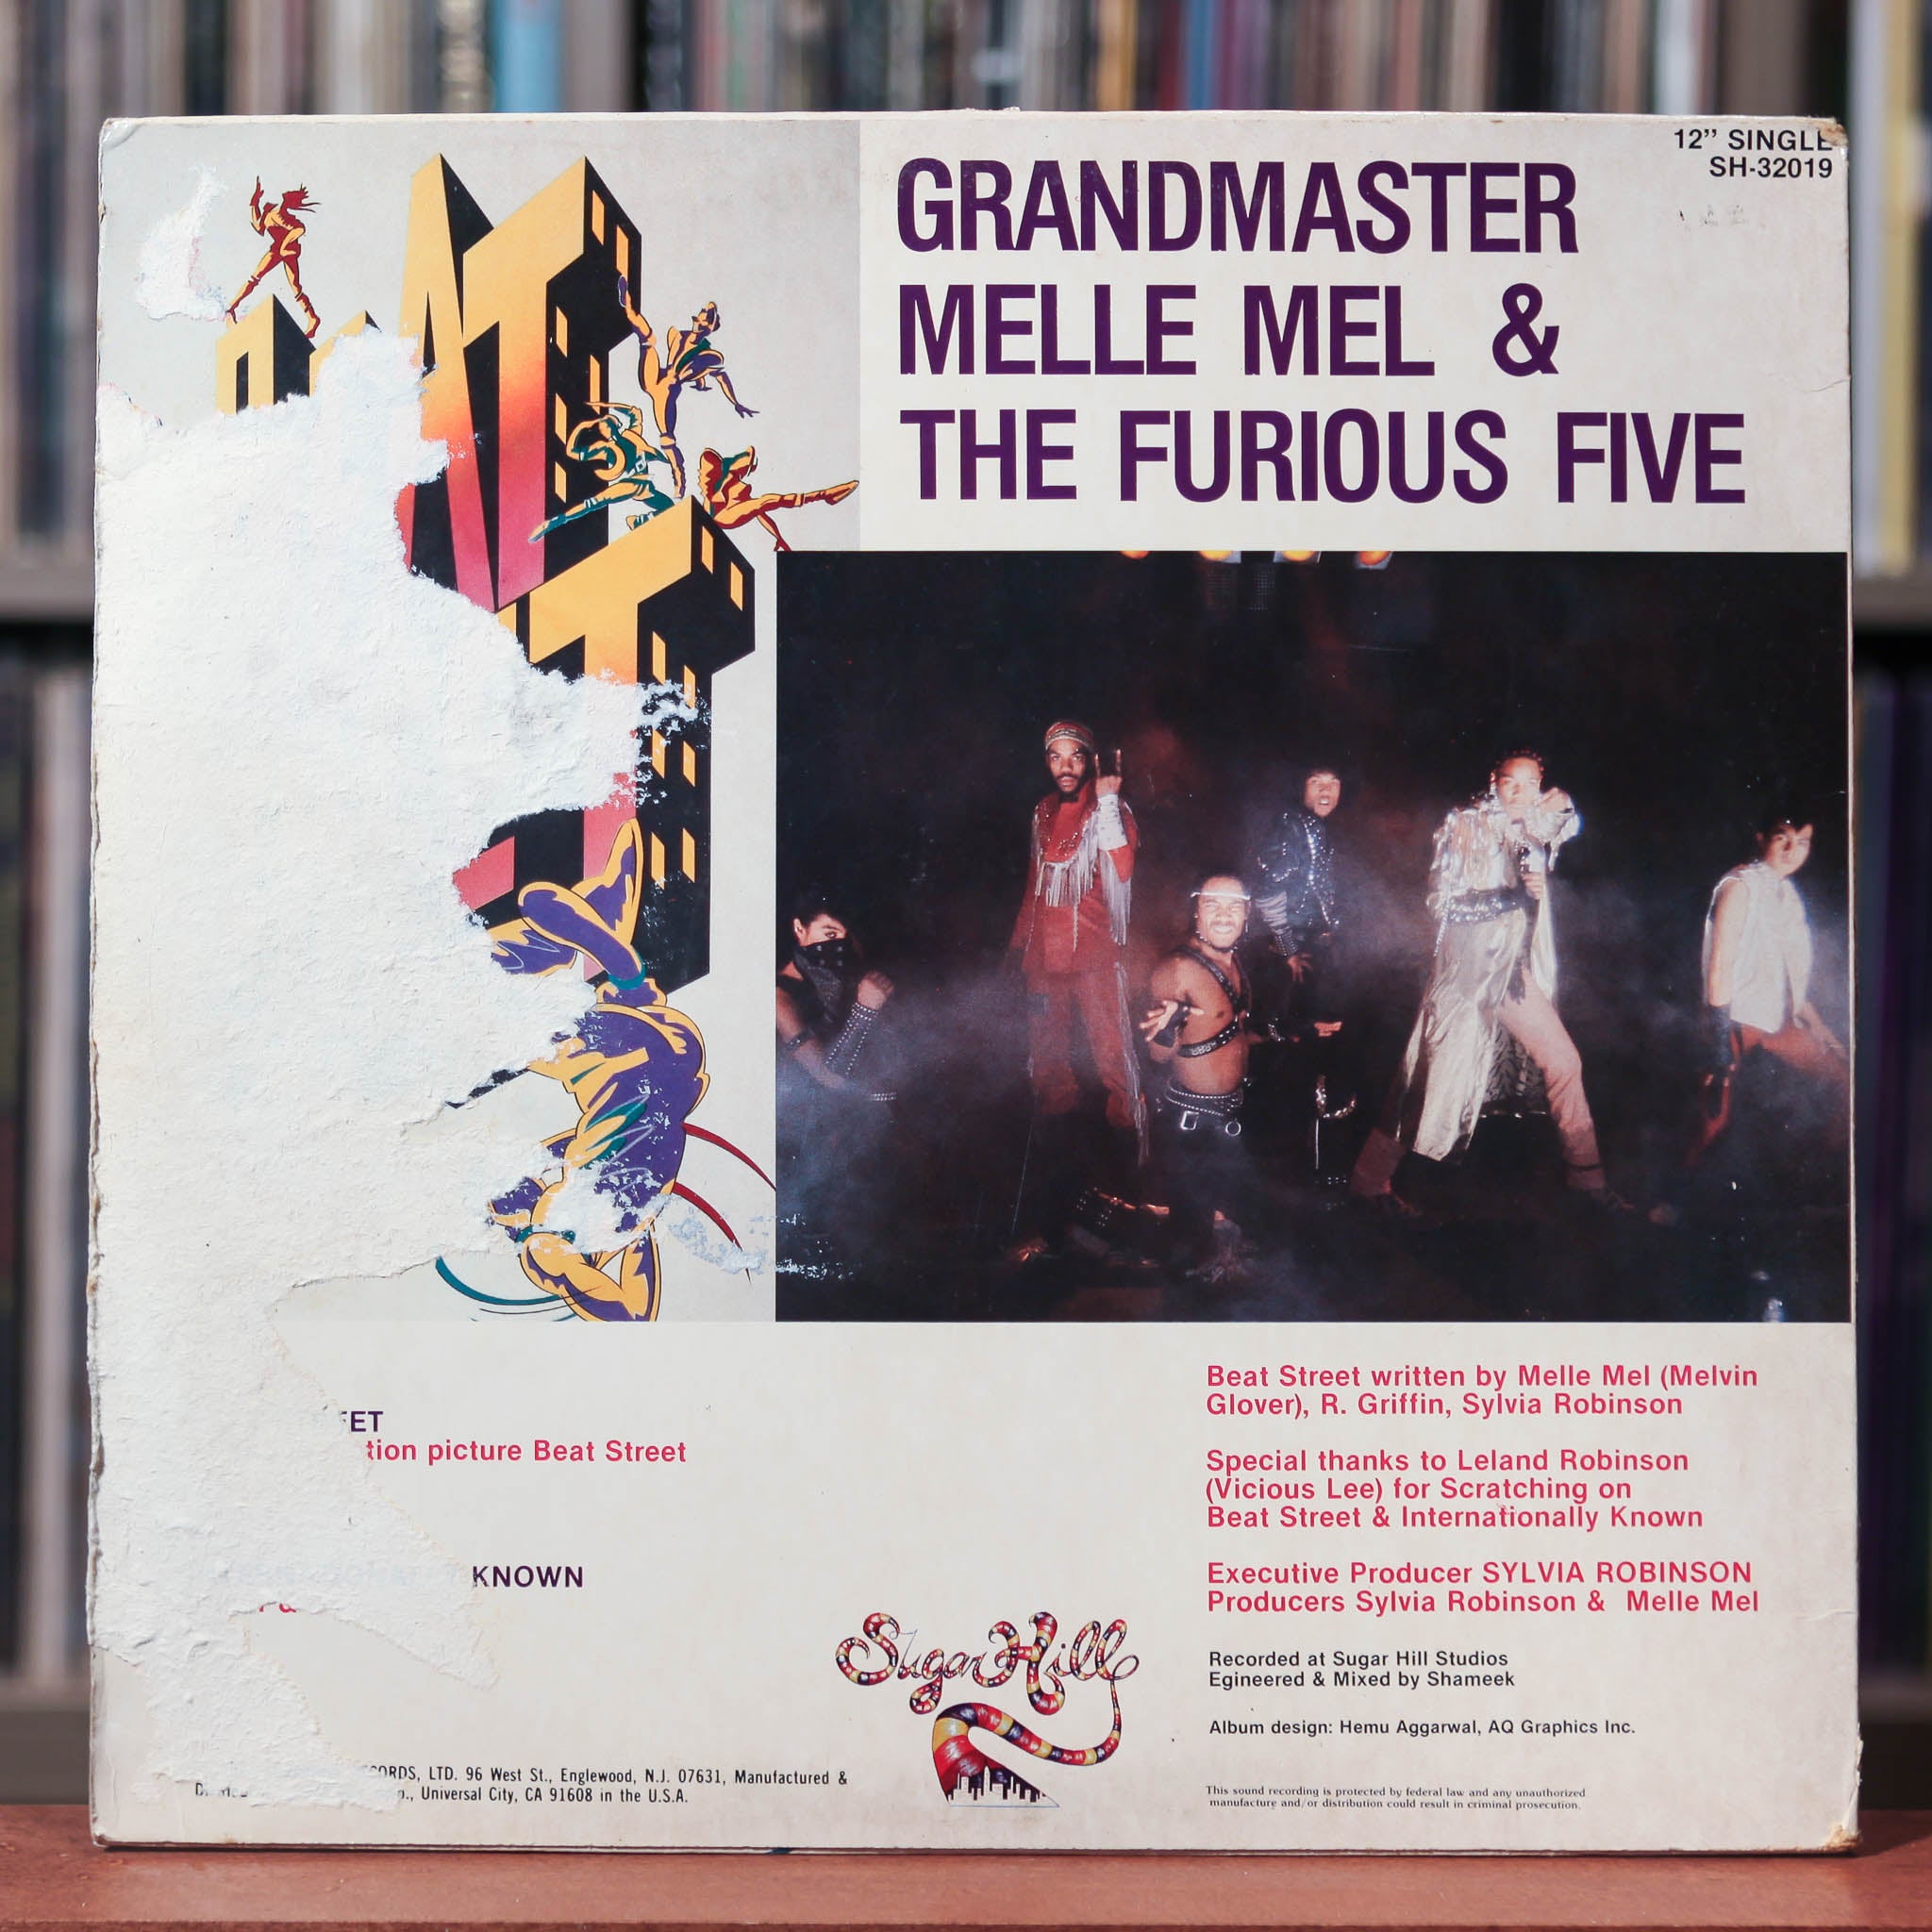 Message From Beat Street, The Best of.. by Grandmaster Flash